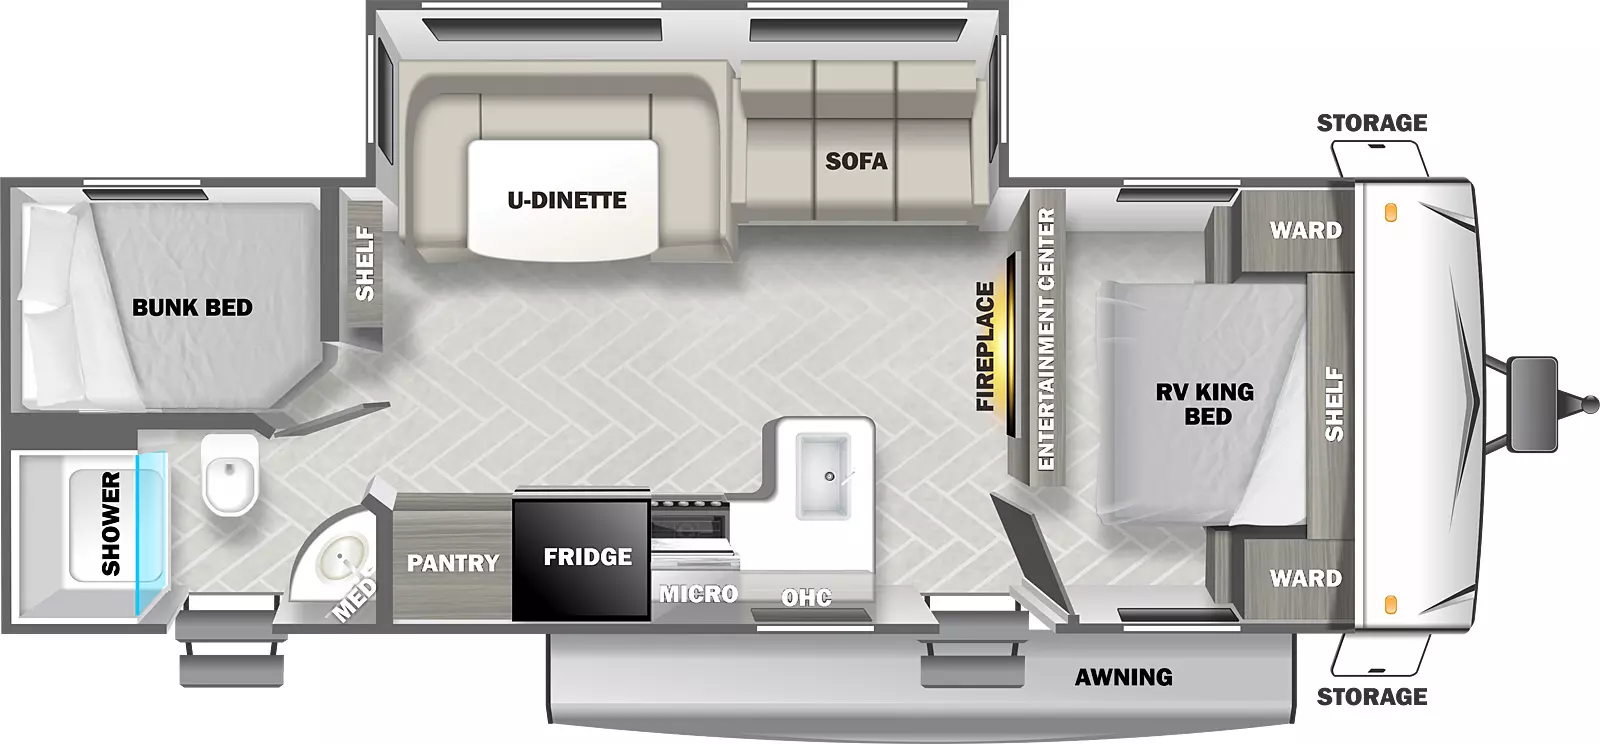 The T2850-DSO has one slideout an two entries. Exterior features front storage, and an awning. Interior layout front to back: RV king bed with shelf above and wardrobes on each side; entertainment center with fireplace below along inner wall; off-door side slideout with sofa and u-dinette; door side entry, peninsula kitchen counter with sink, overhead cabinet, microwave, cooktop, refrigerator and pantry; rear off-door side bunk bed with shelf; rear door side full bathroom with medicine cabinet and second entry.